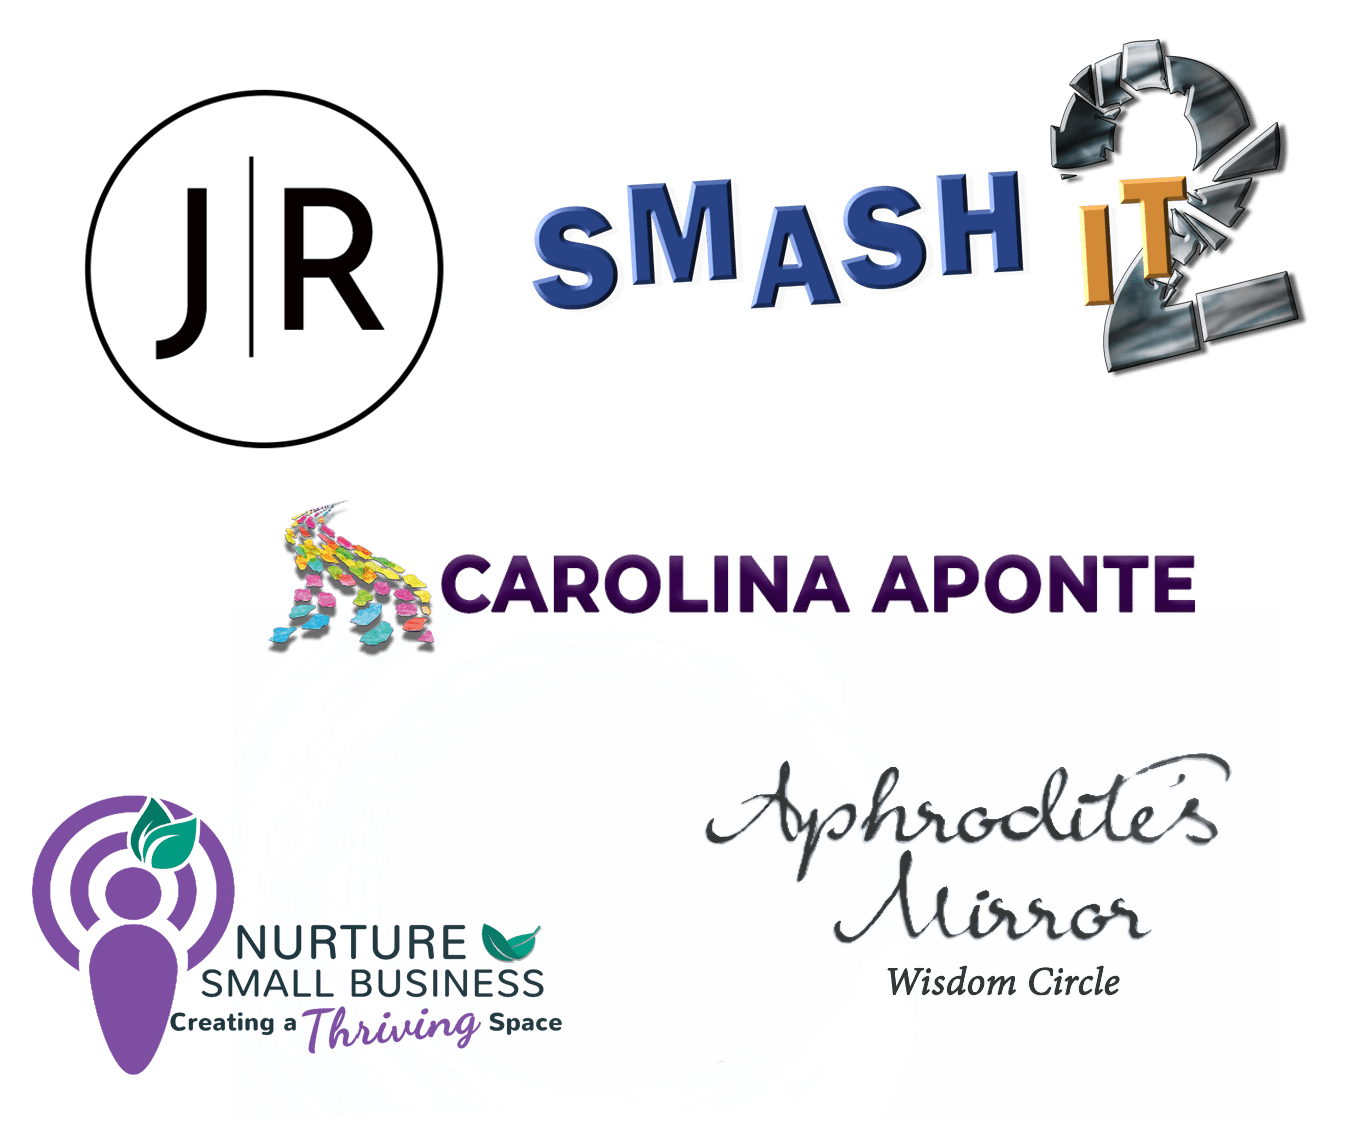 Image of the following small business logos (top to bottom, left to right): J&R, SmashIt2, Carolina Aponte, Nurture Small Business Podcast, and Aphrodite's Mirror.